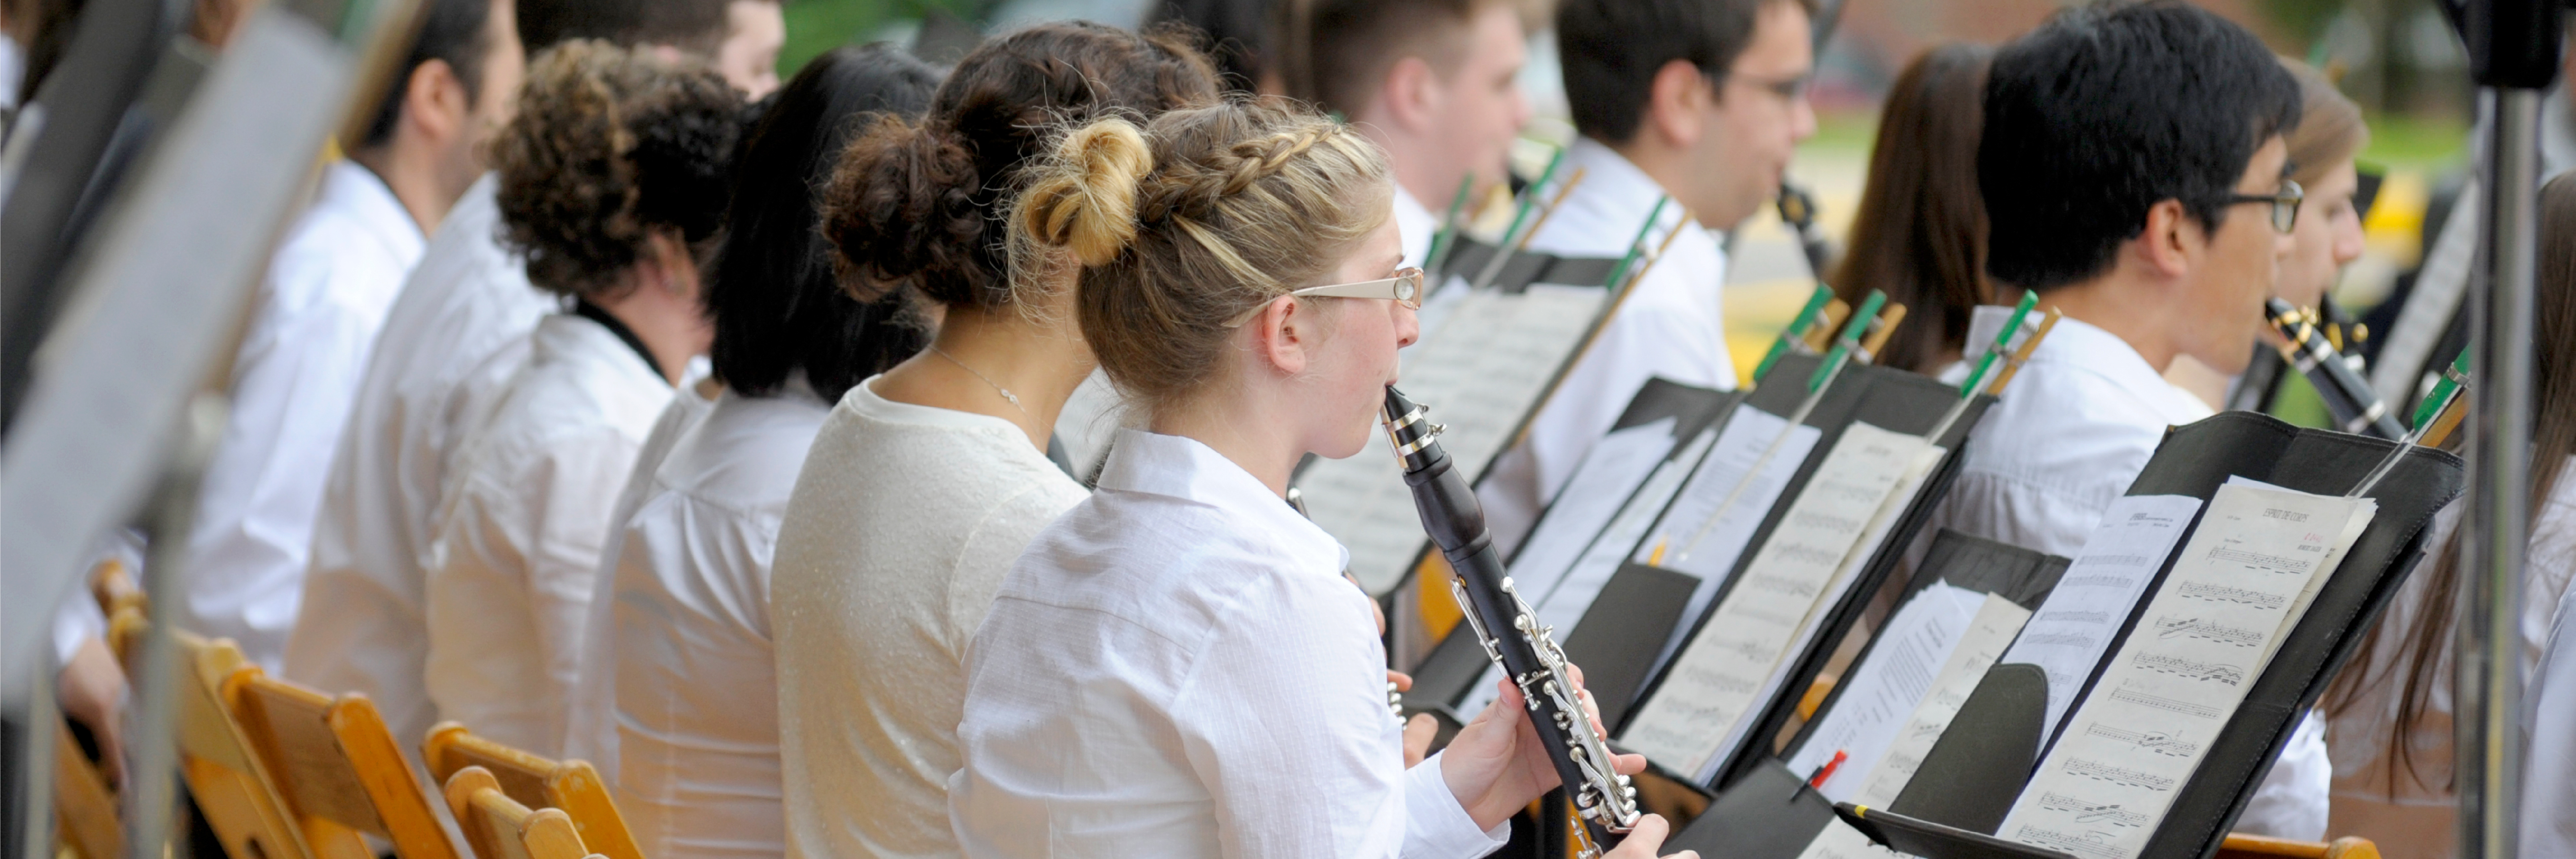 Image of students playing wind instruments in the Summer Band Concert